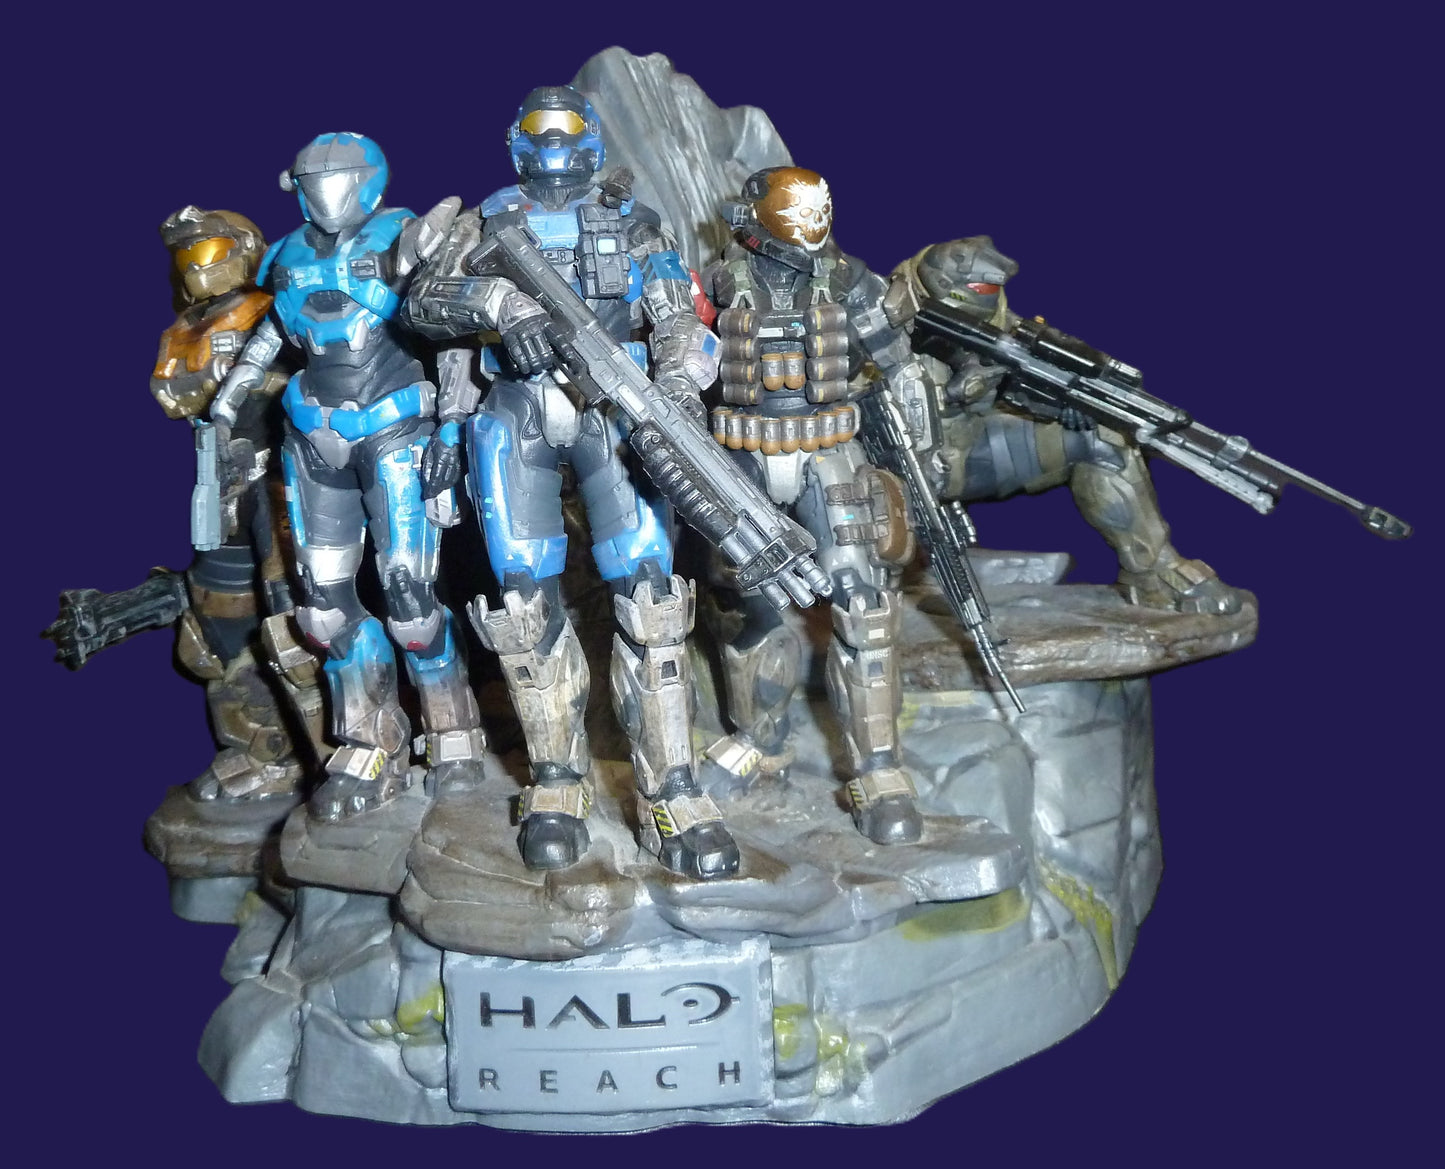 Halo Reach Noble Team Legendary, Limited Edition 2010 Statue (no game)